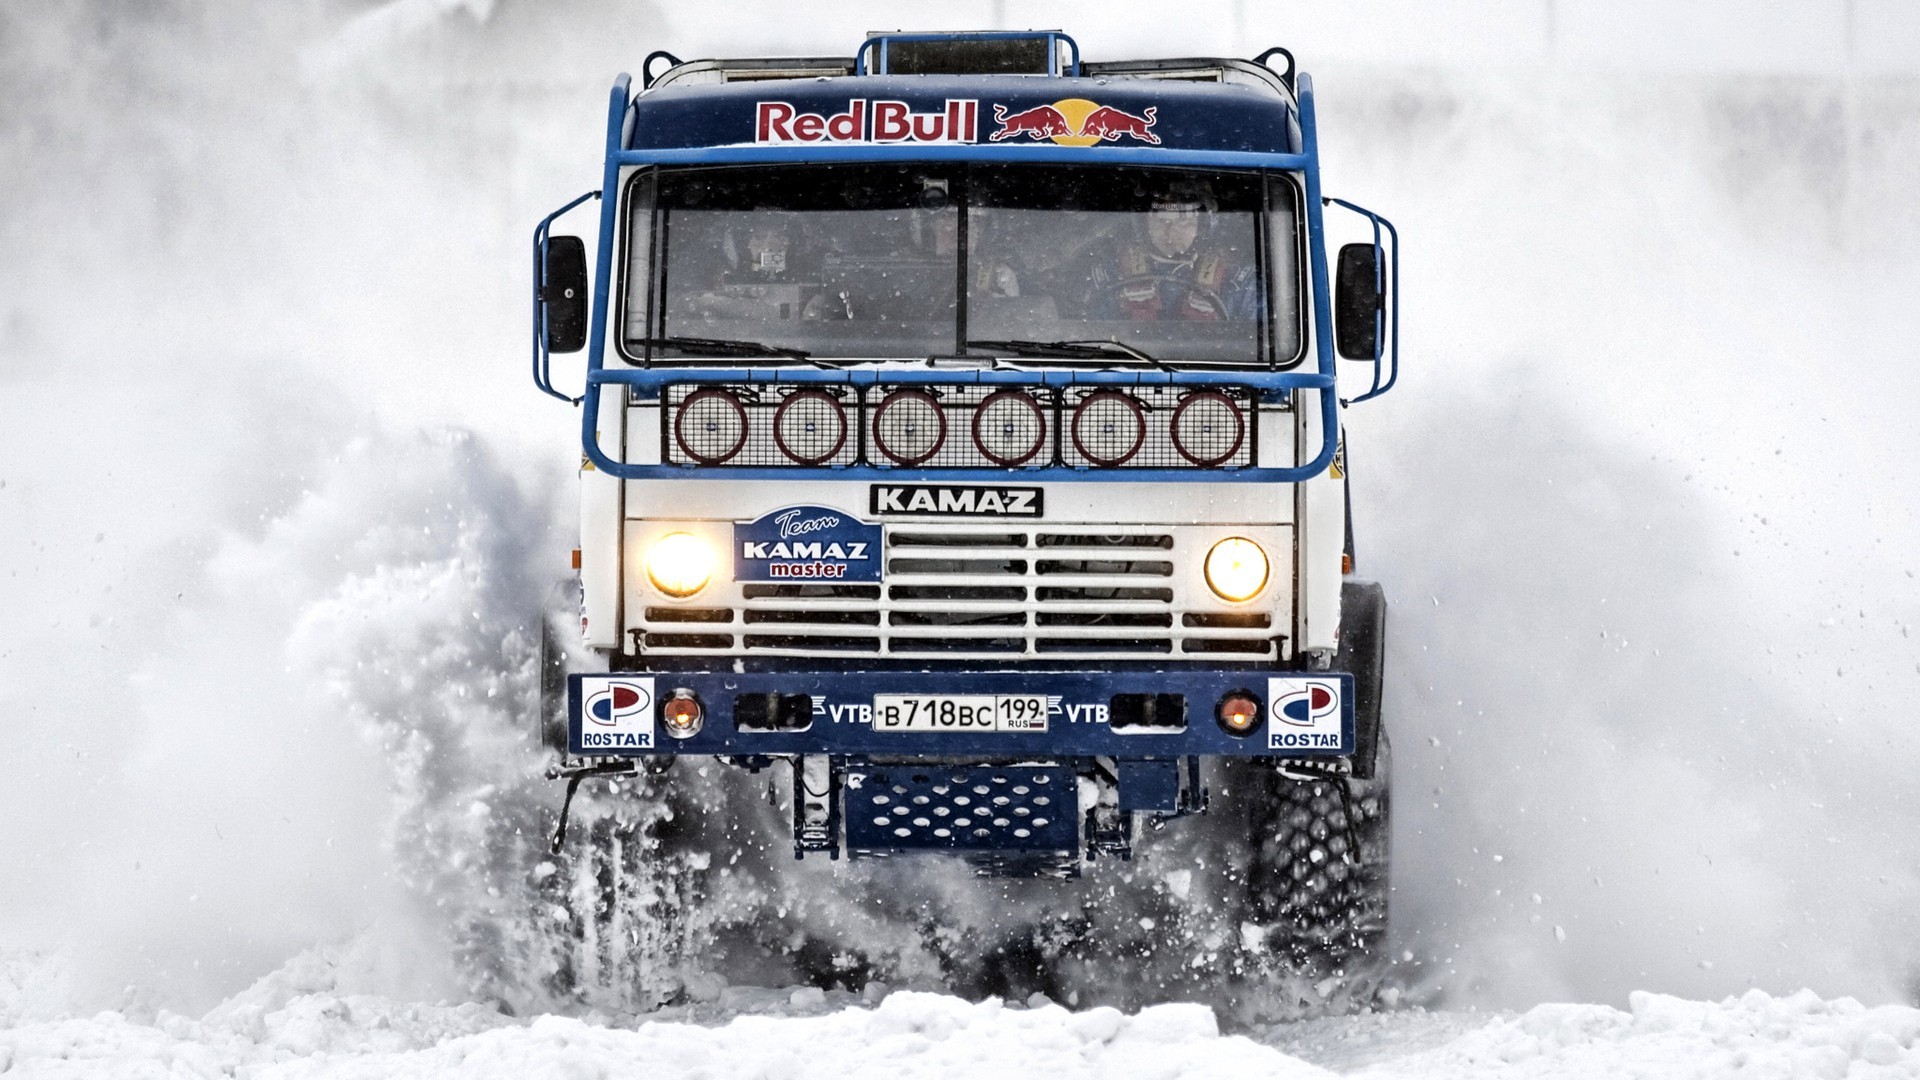 General 1920x1080 snow Kamaz truck vehicle frontal view rally cars white Russian trucks